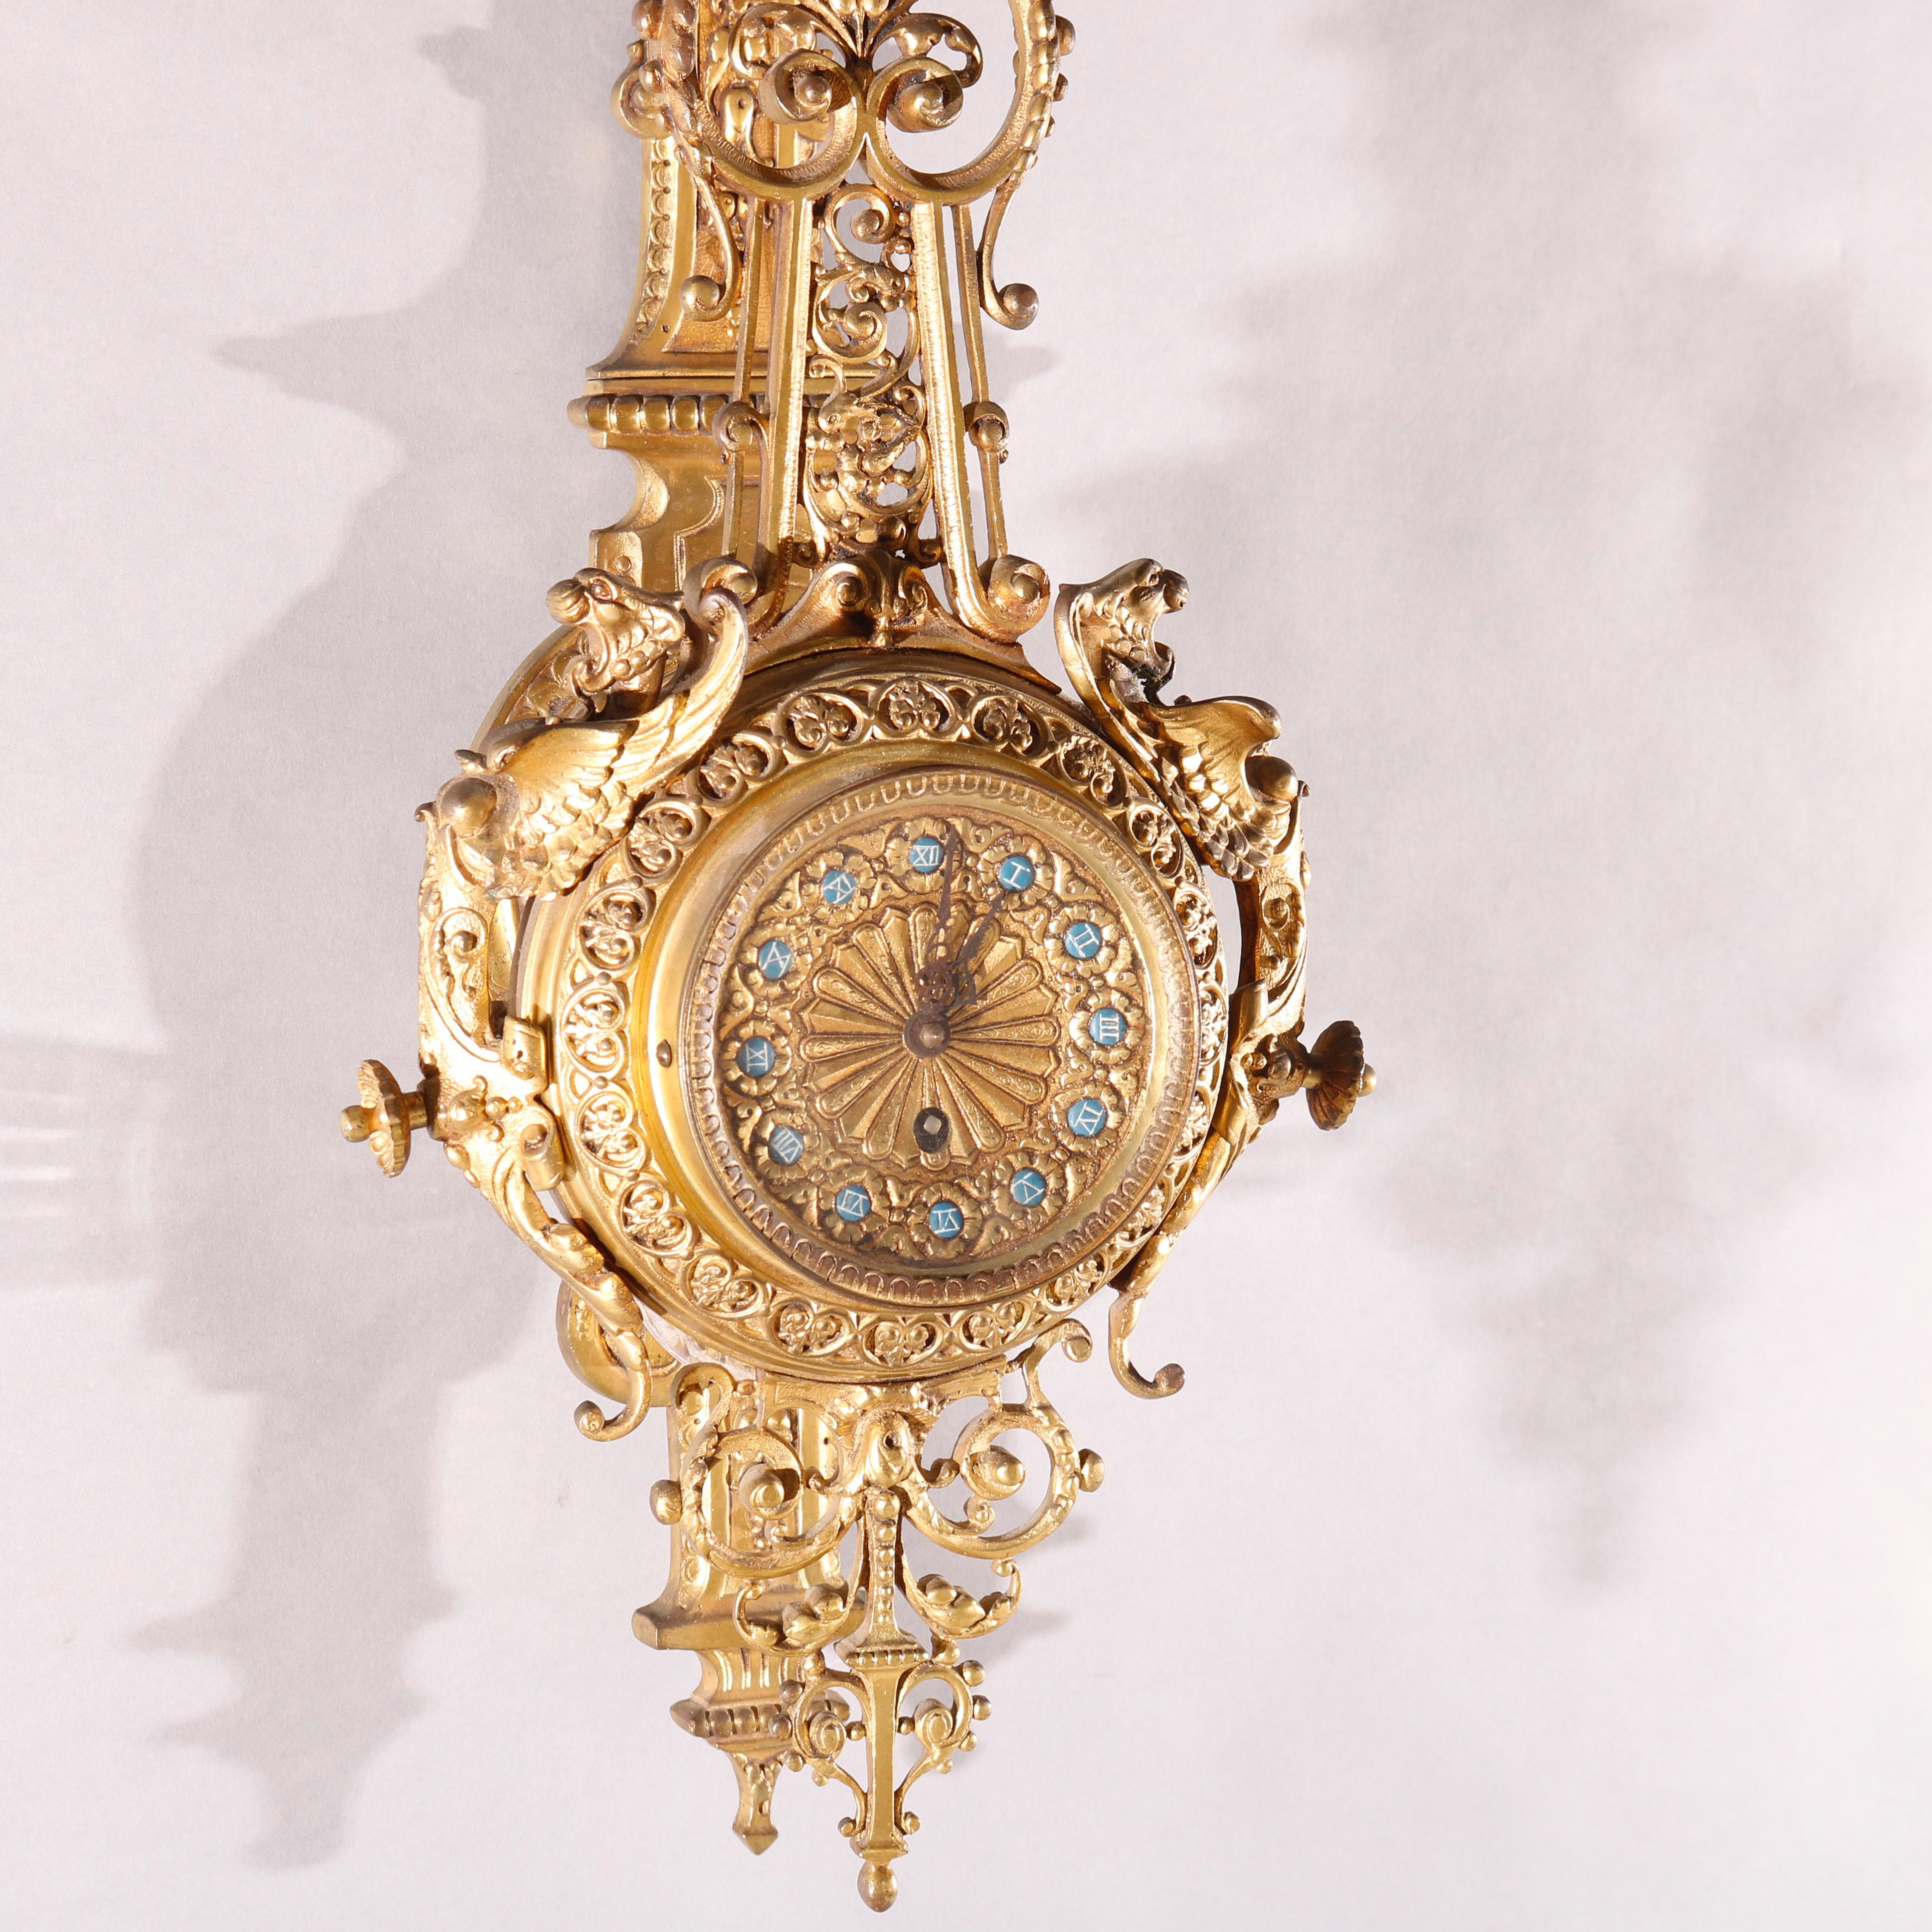 Antique French Empire Style Figural Gilt Bronze Hanging Wall Clock, circa 1880 3